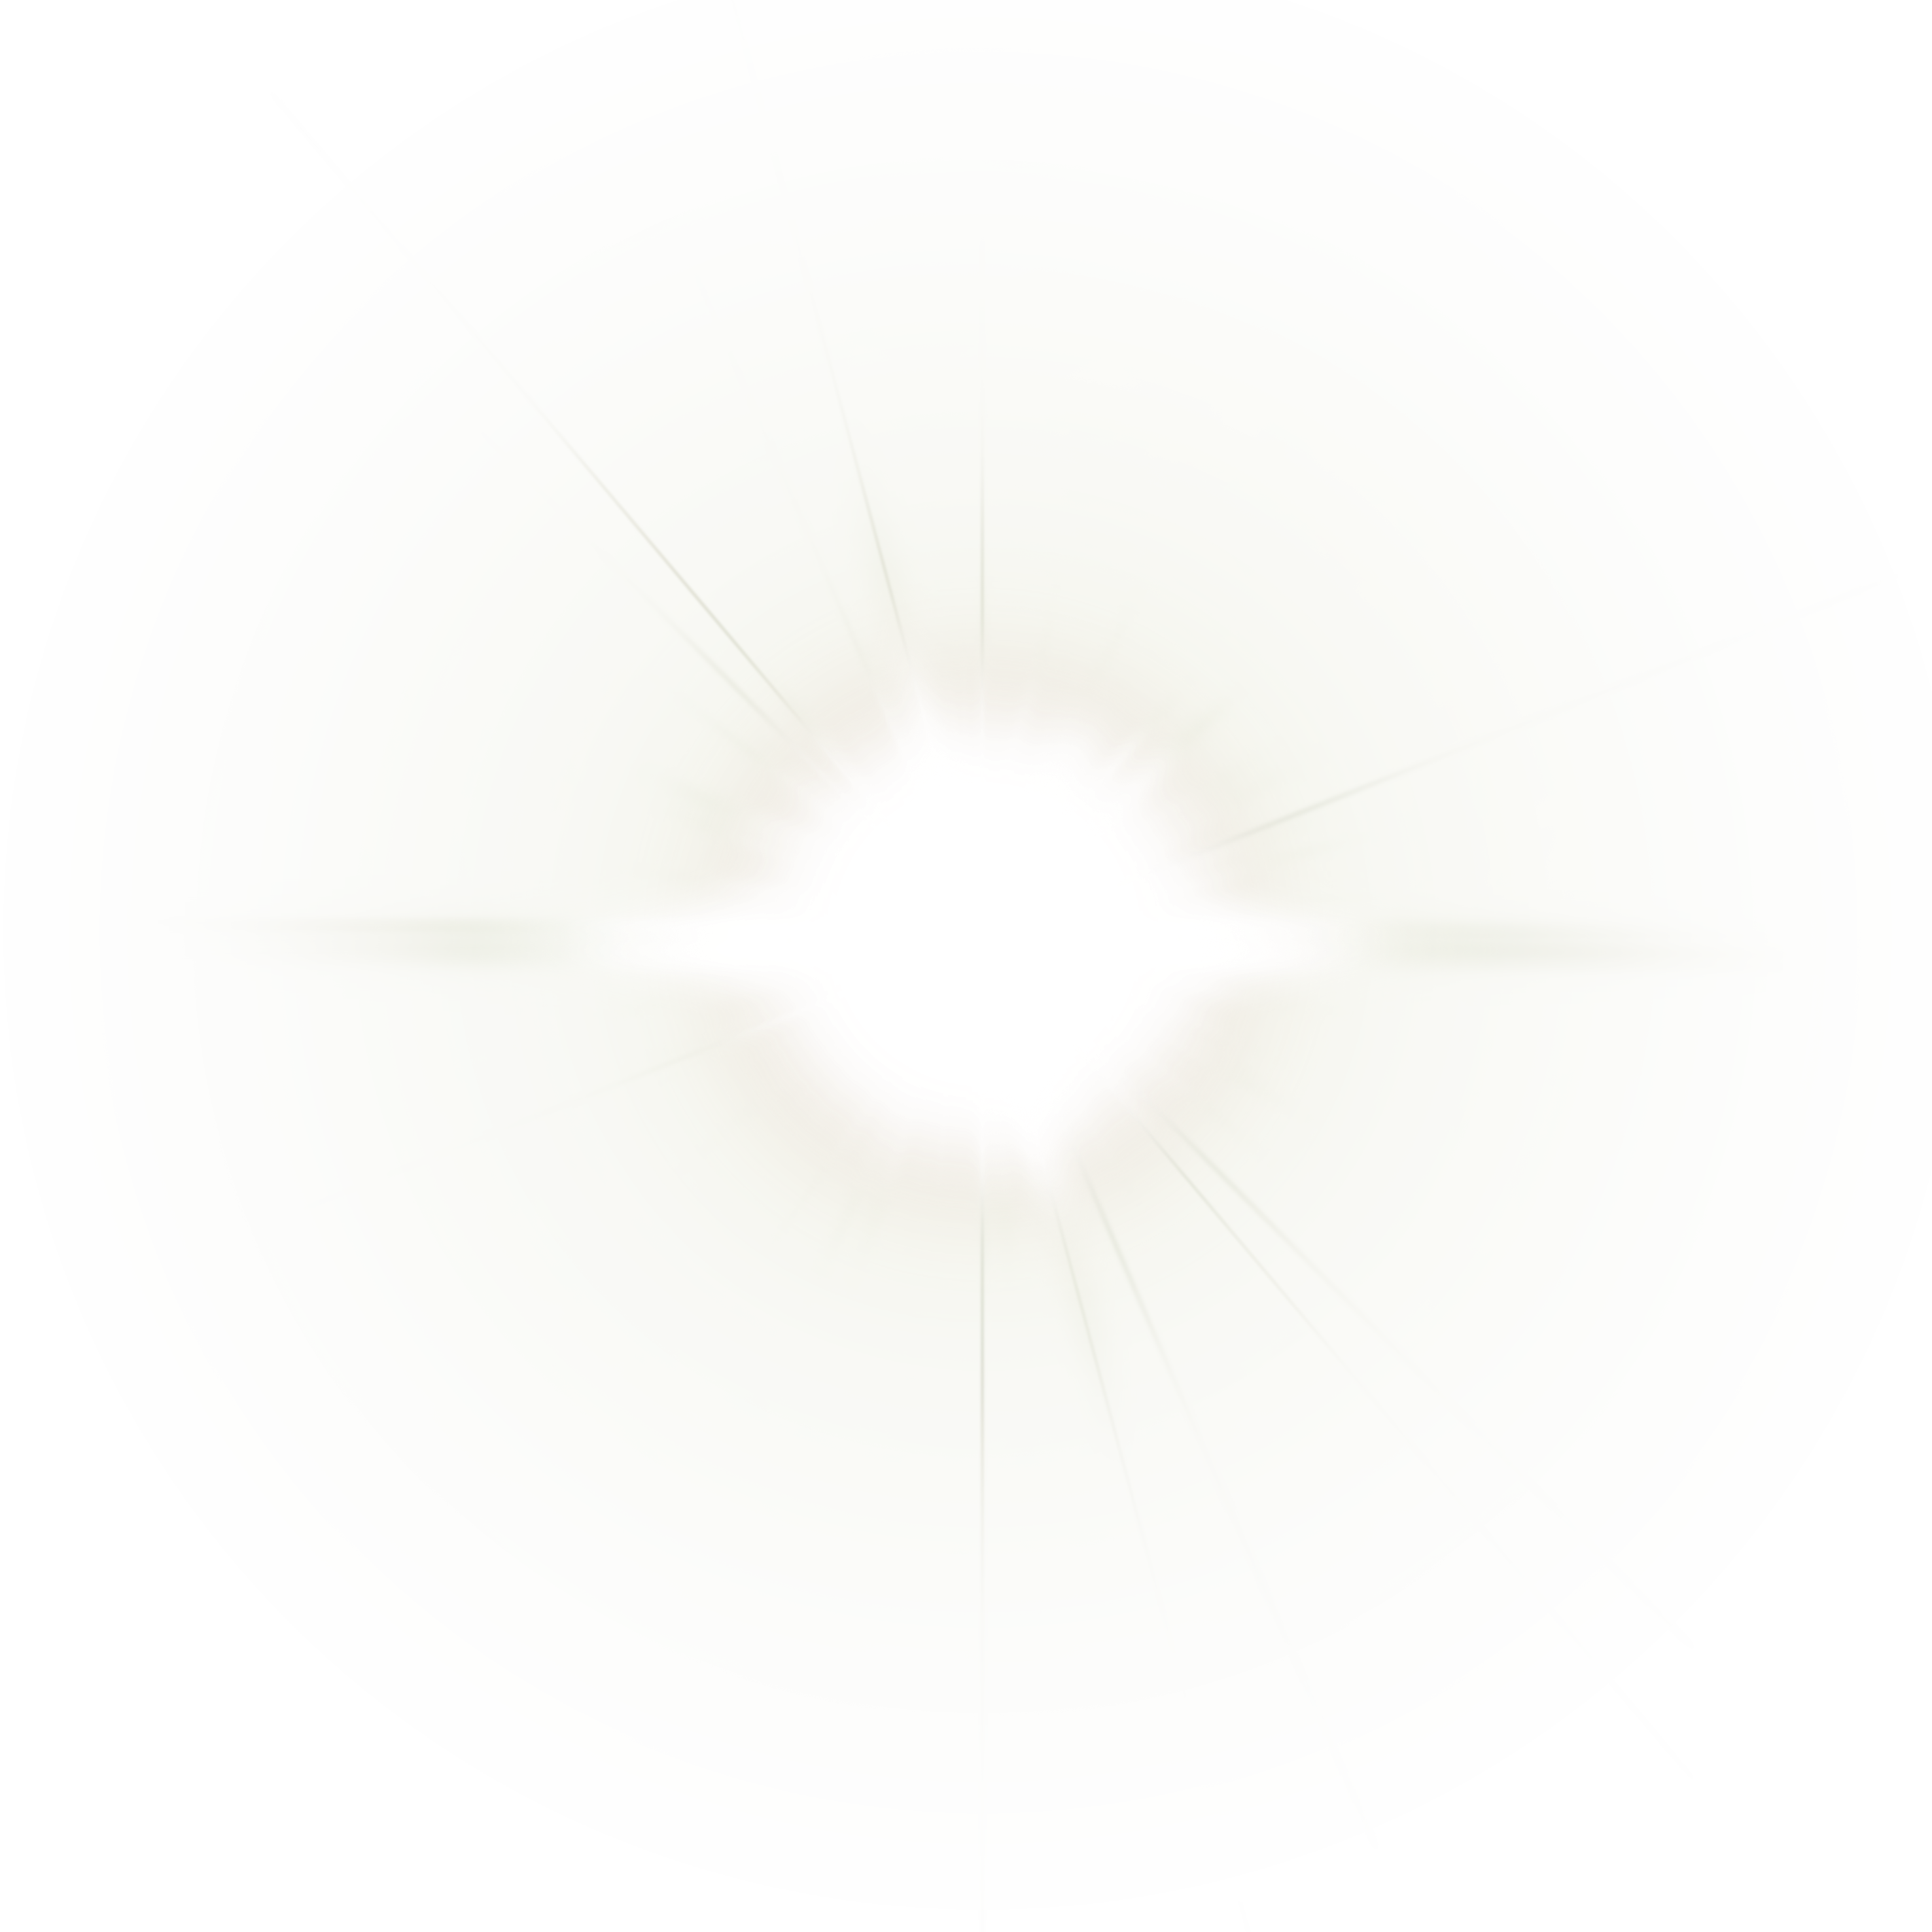 Sun PNG images